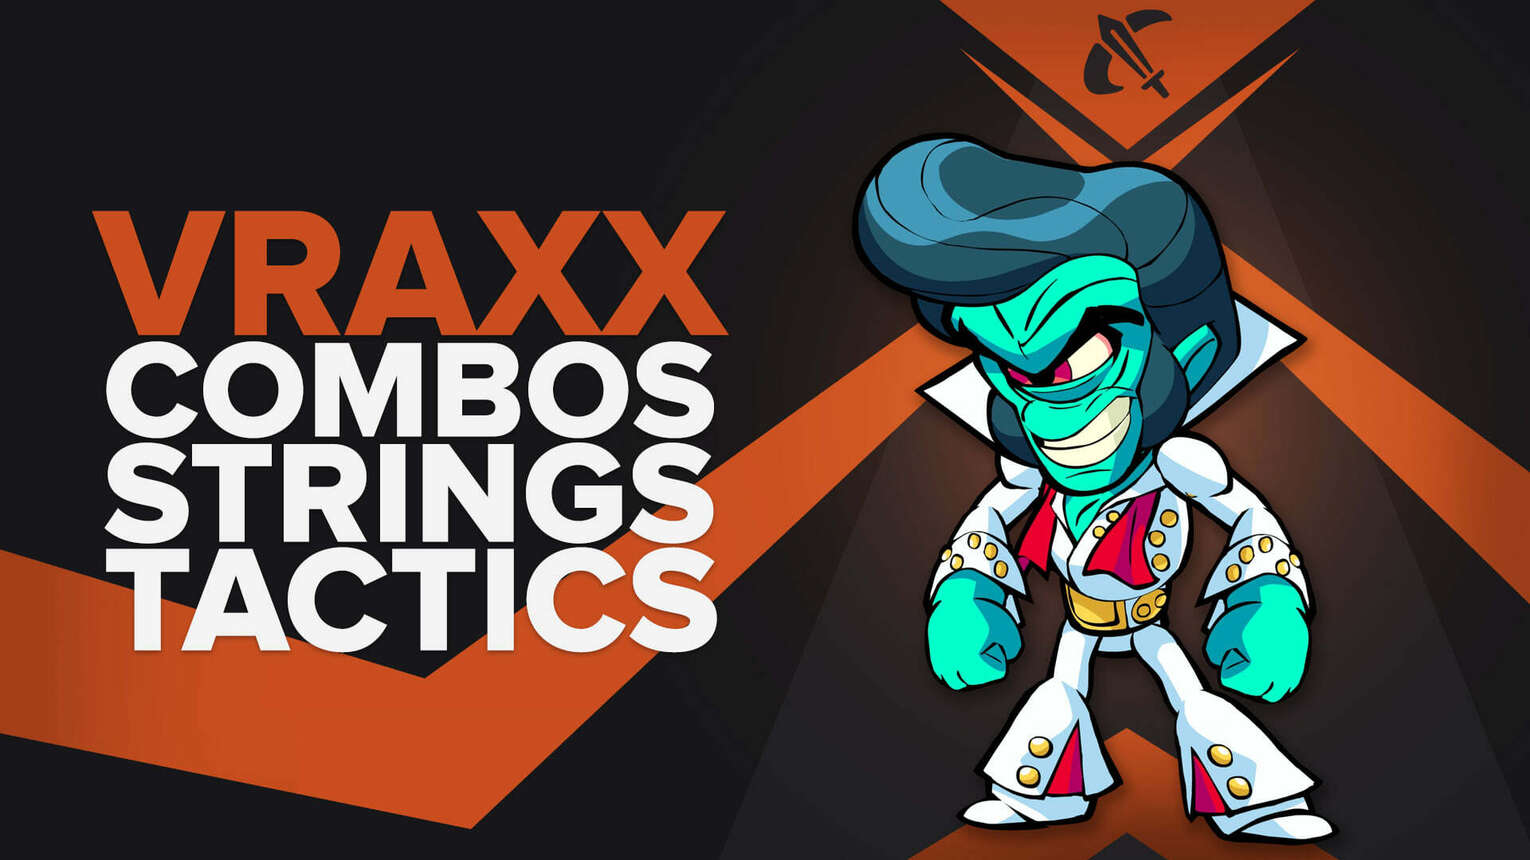 Best Lord Vraxx combos, strings and tips in Brawlhalla